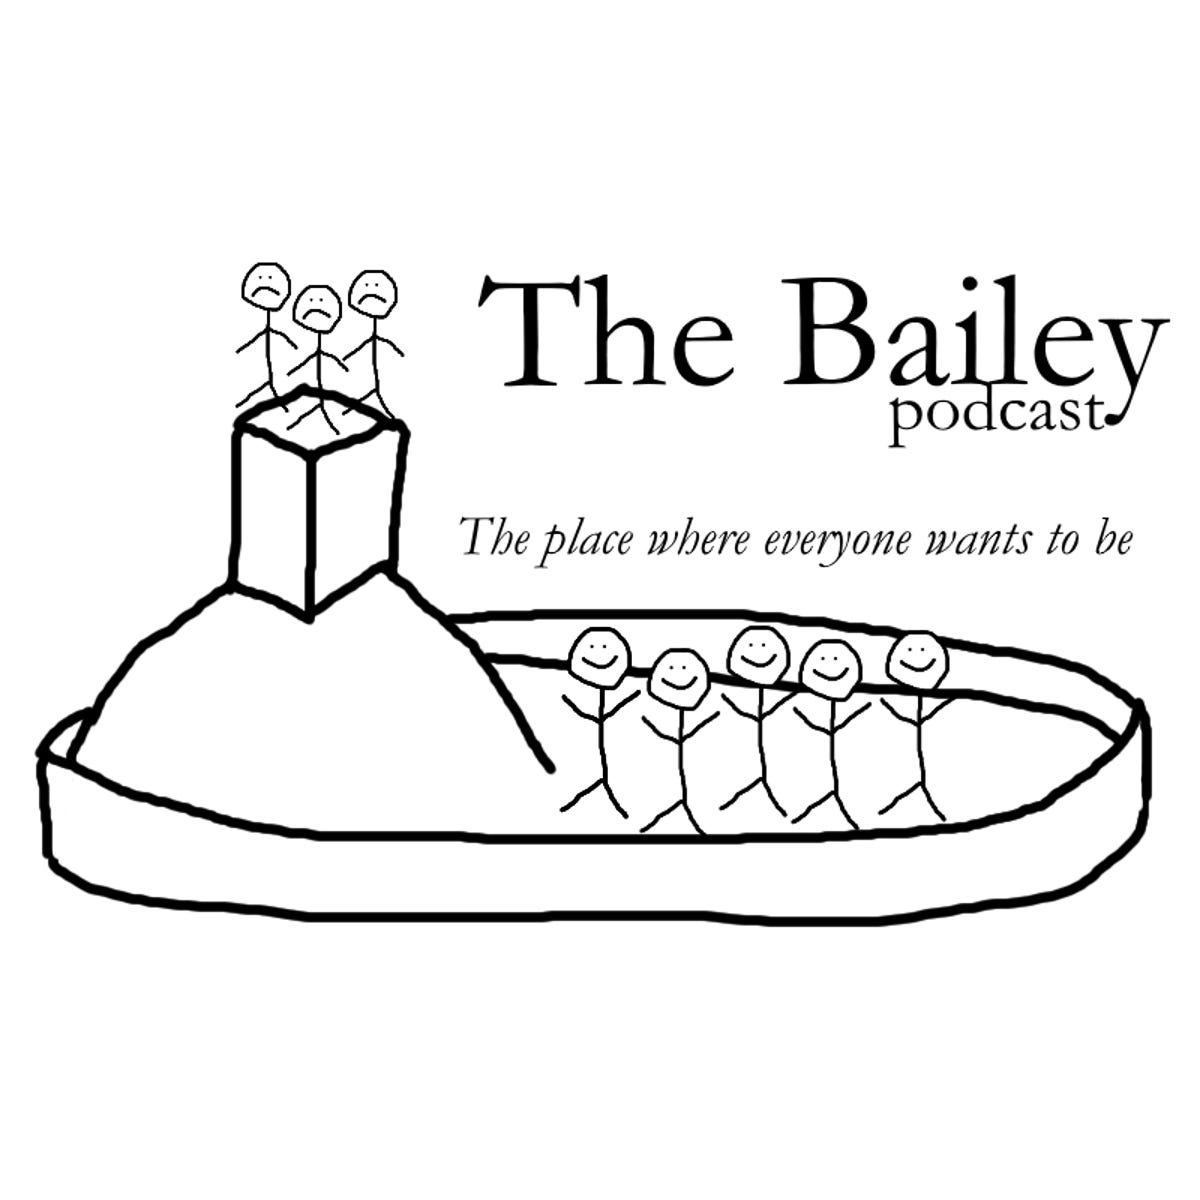 Artwork for The Bailey Podcast